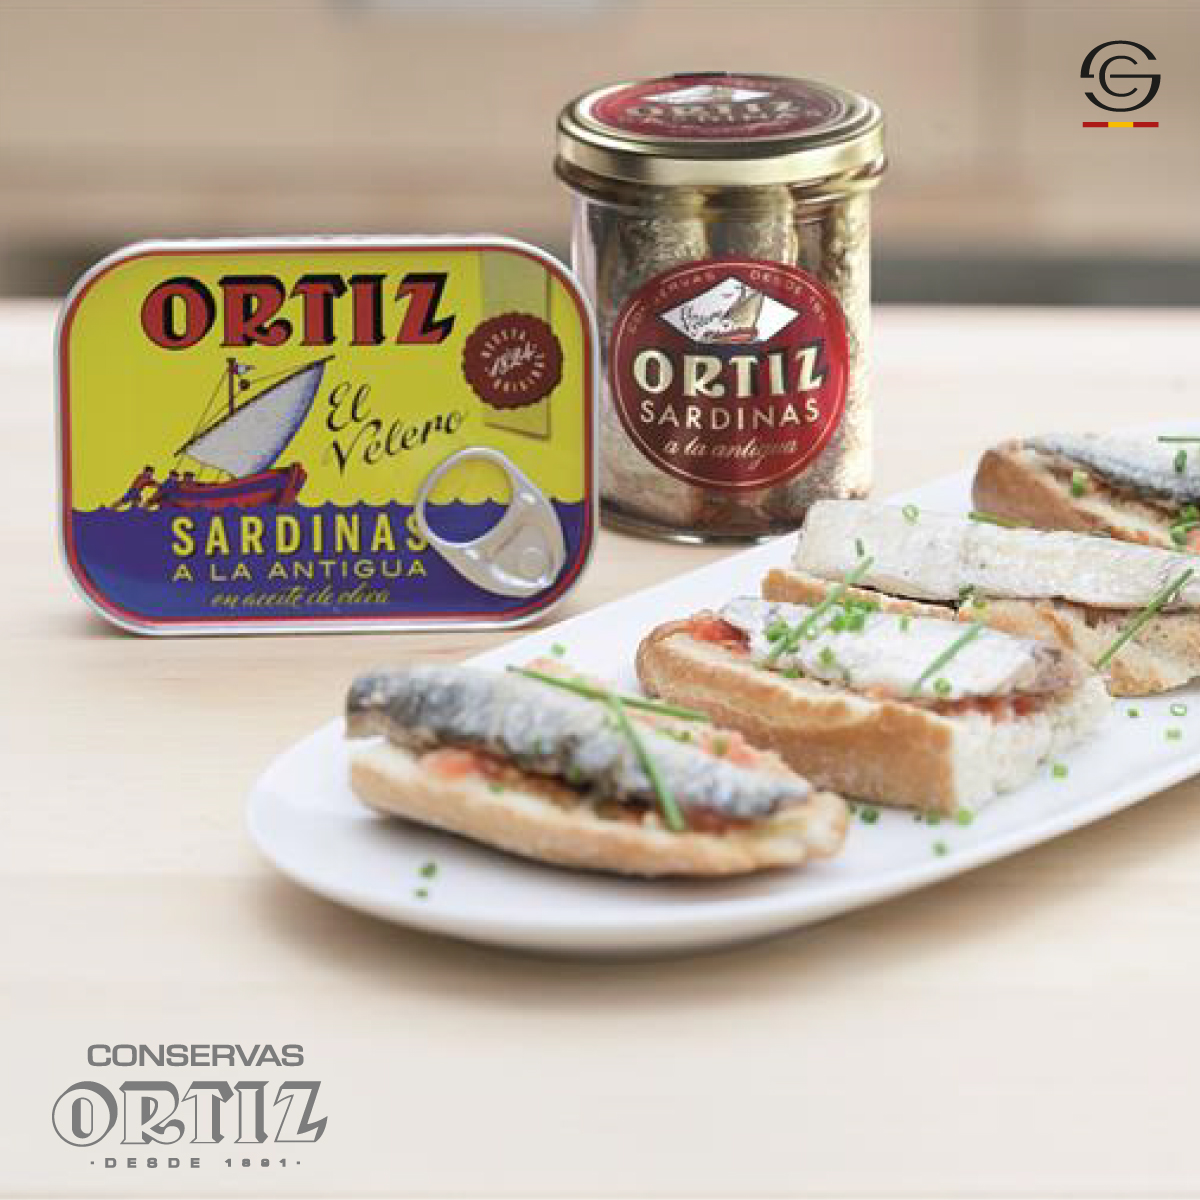 #Partner #ConservasOrtiz
Bonito del Norte (white tuna), anchovies, sardines, and other premium seafood products. Ortiz products are now available in the finest restaurants and stores across over 50 countries accross 5 continents.

#excellenceofspain #madeinspain #gourmet